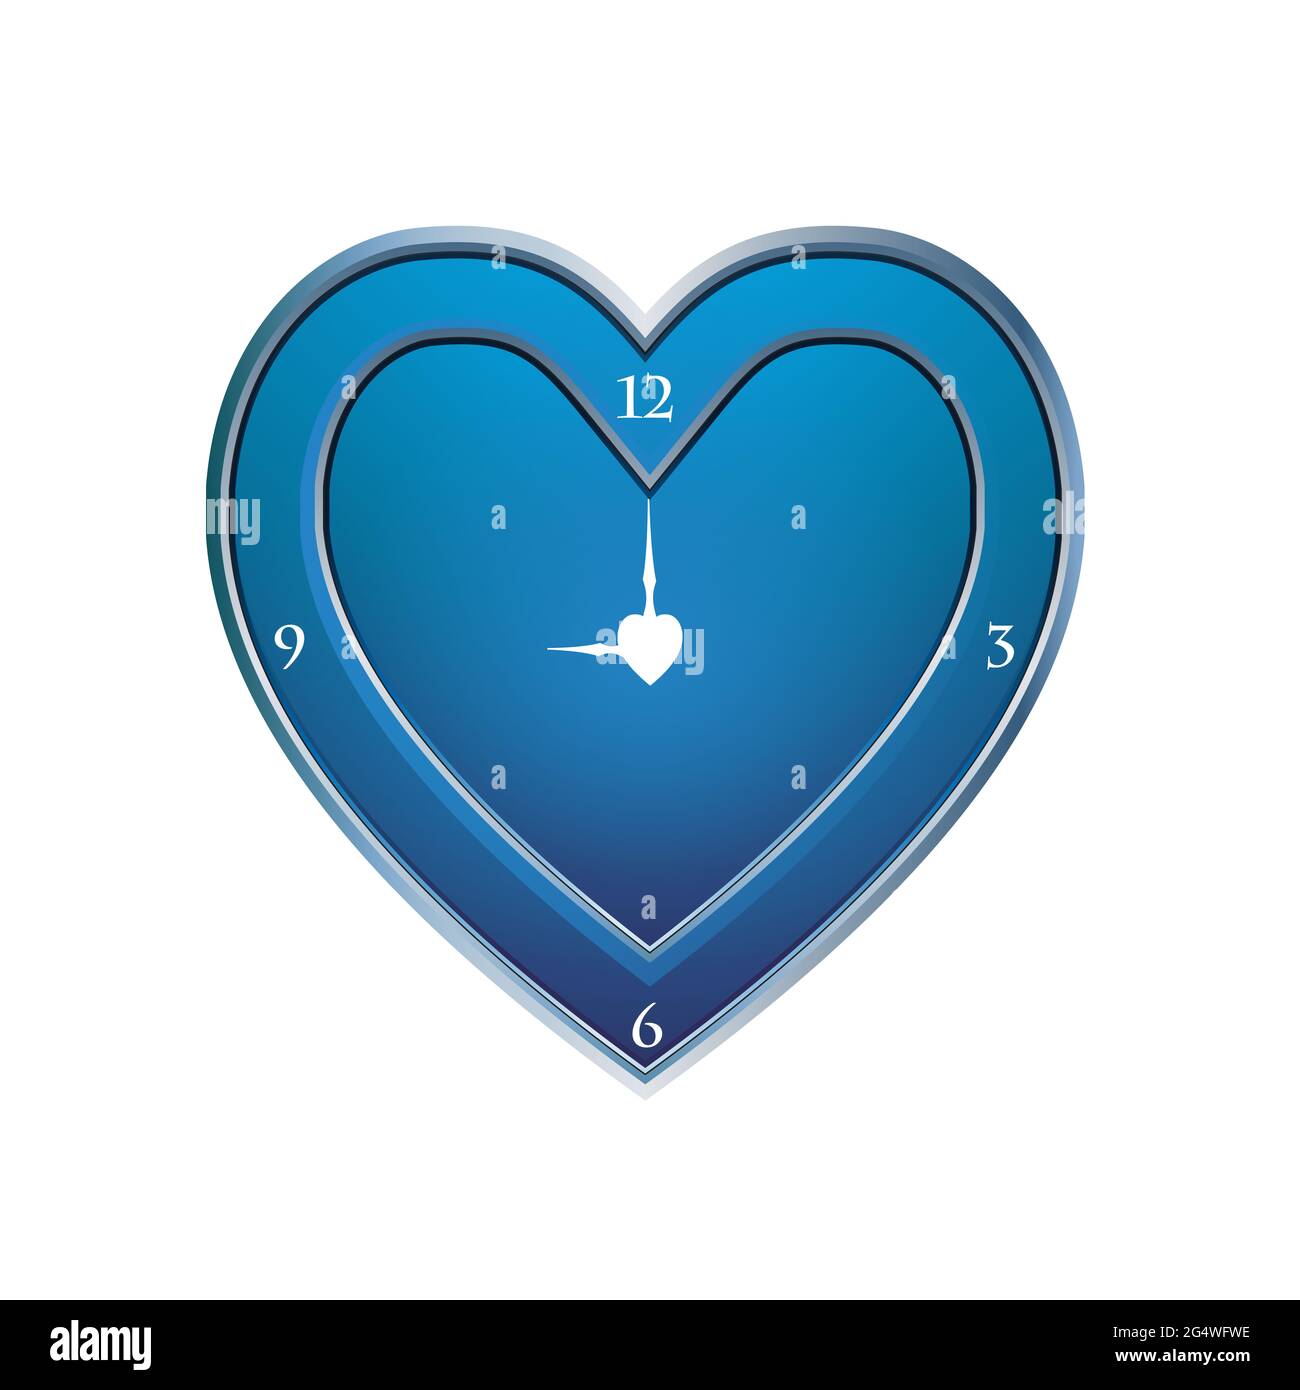 Abstract Heart background Stock Photo